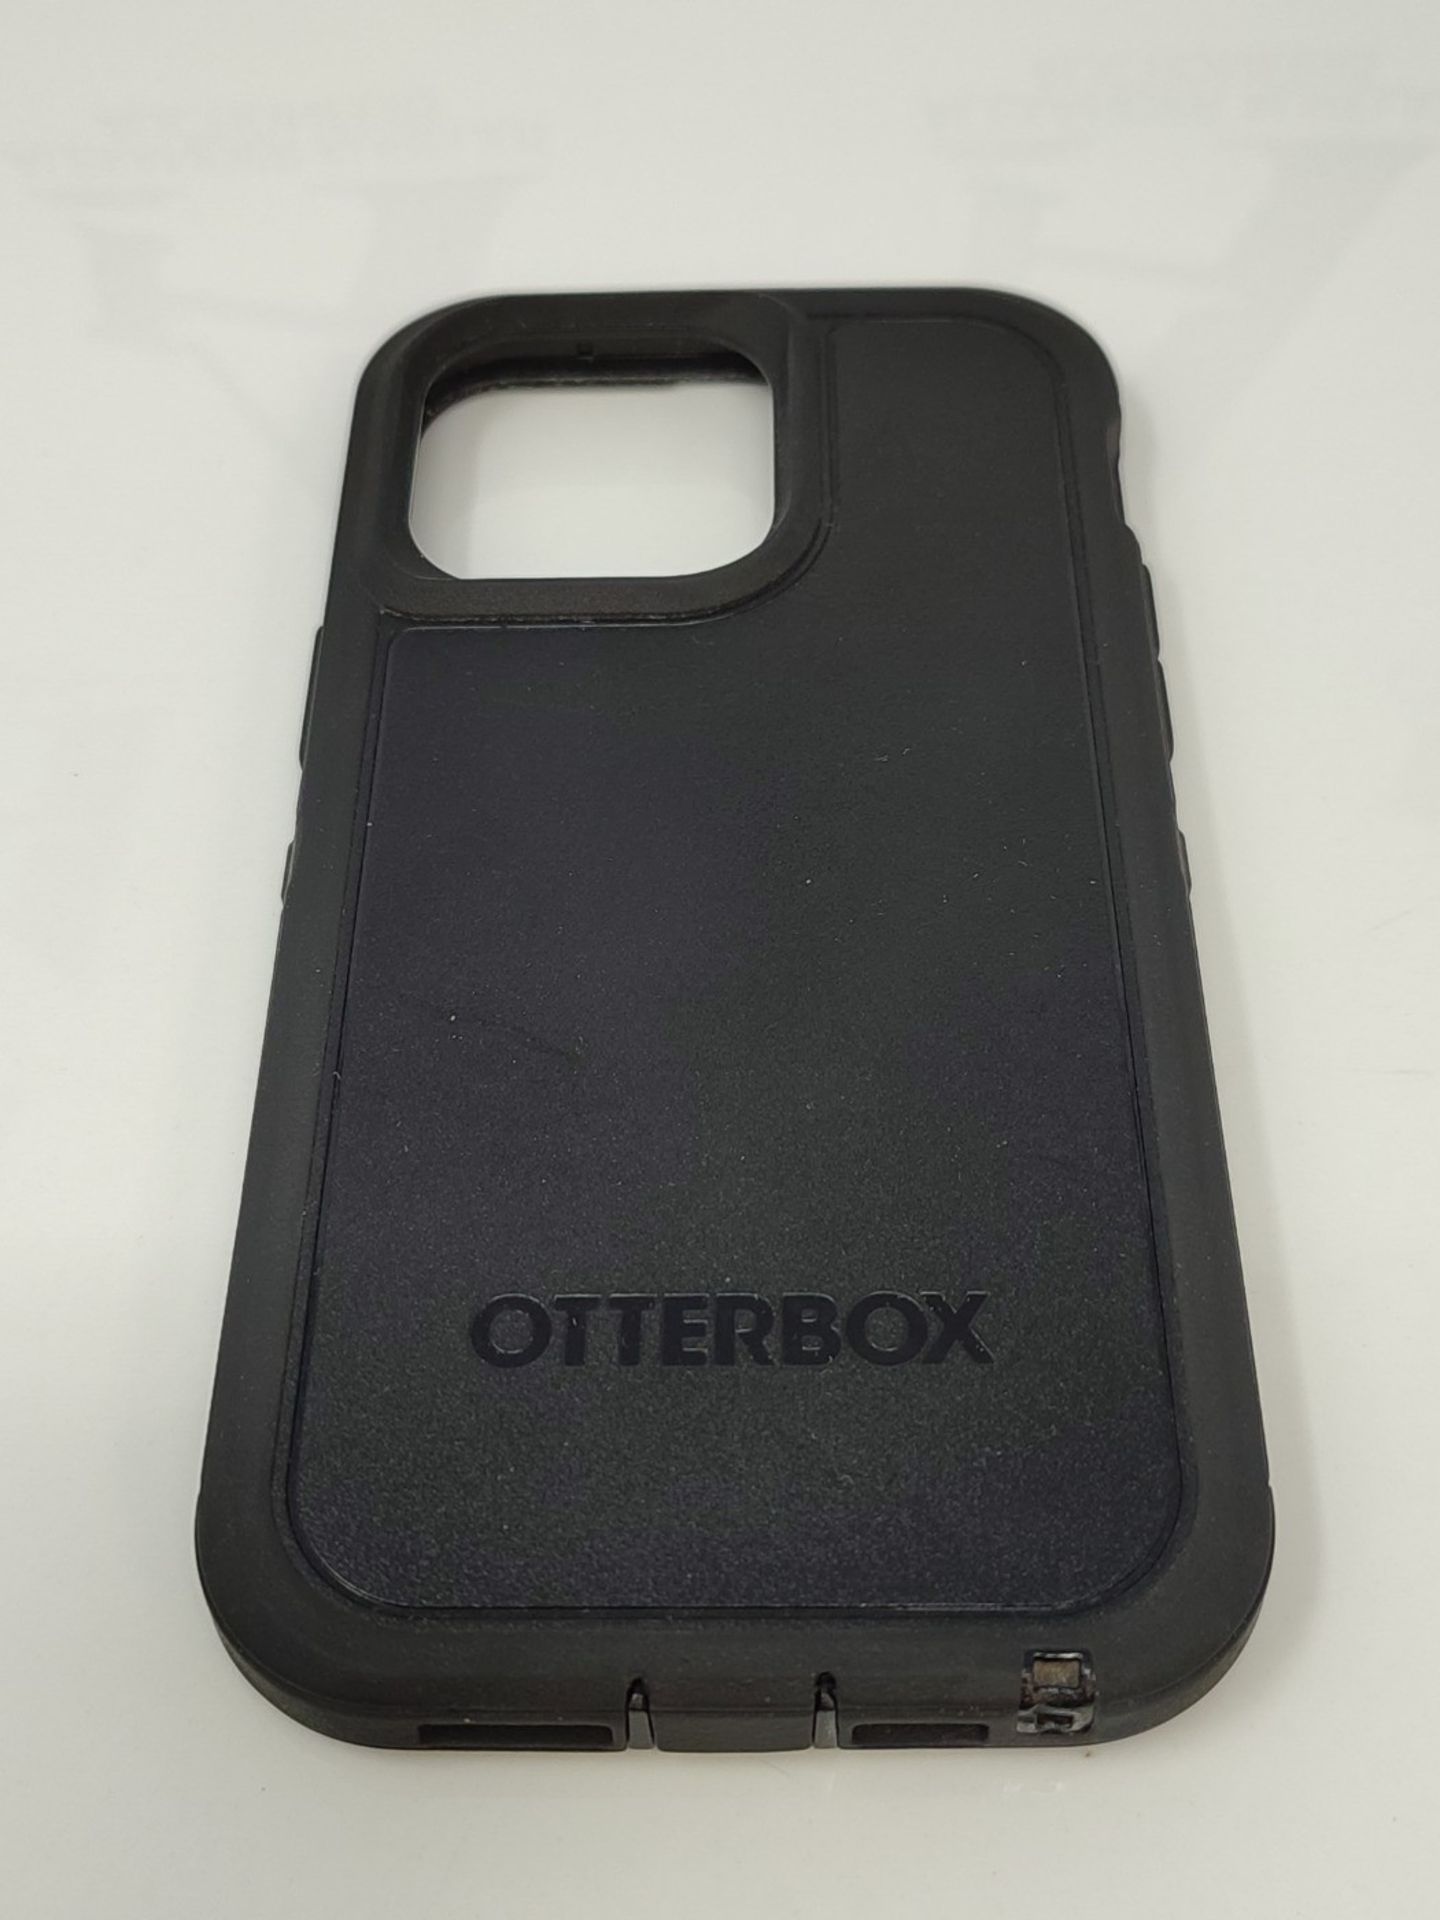 OtterBox Defender XT Case for iPhone 14 Pro Max with MagSafe, Shockproof, Drop proof, - Image 3 of 3